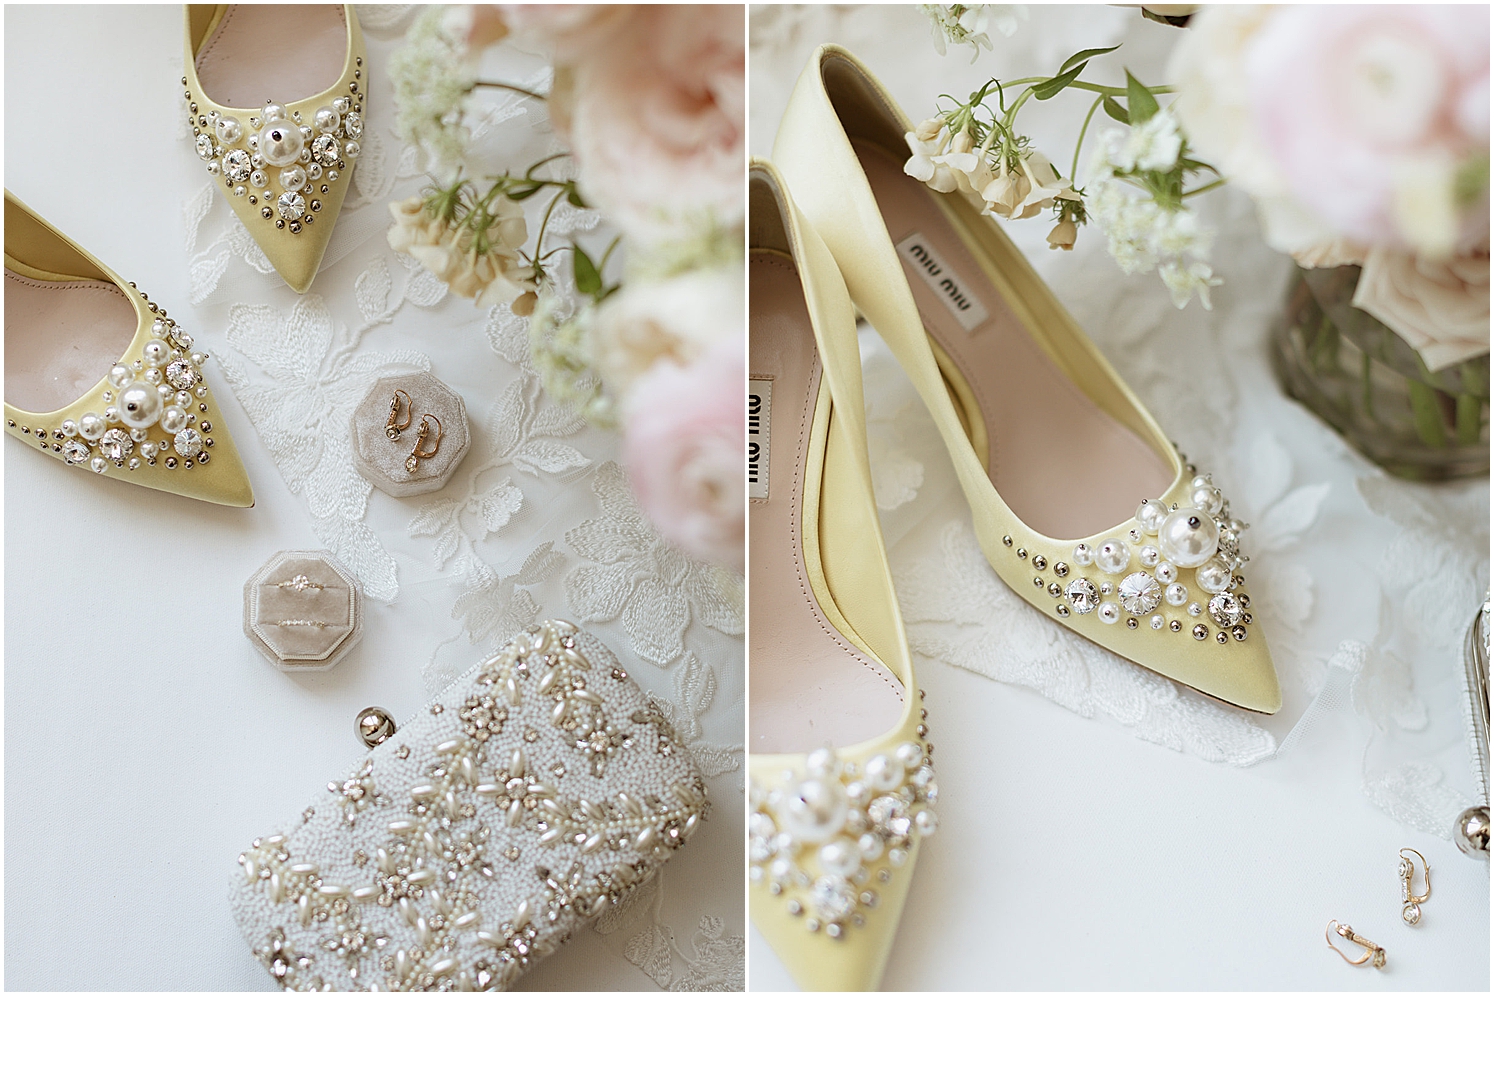 Bridal-shoes-with-pearl-accents-with-pearl-stone-clutch